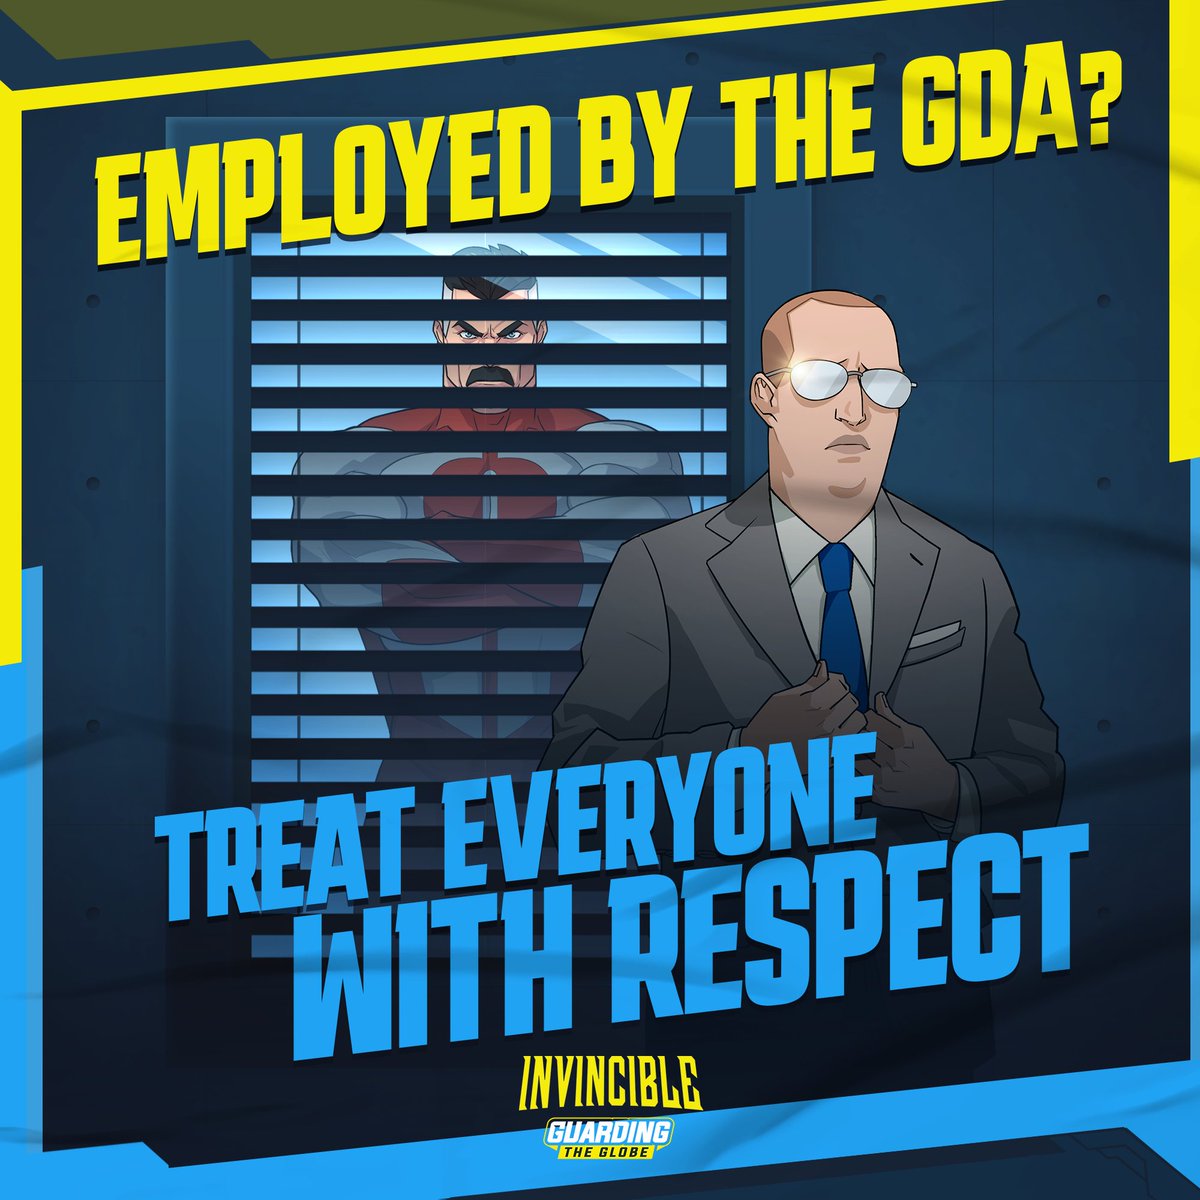 Employed by the GDA? Thank you for guarding the globe. Please treat all your fellow agents and heroes with respect as we work together to save the world.